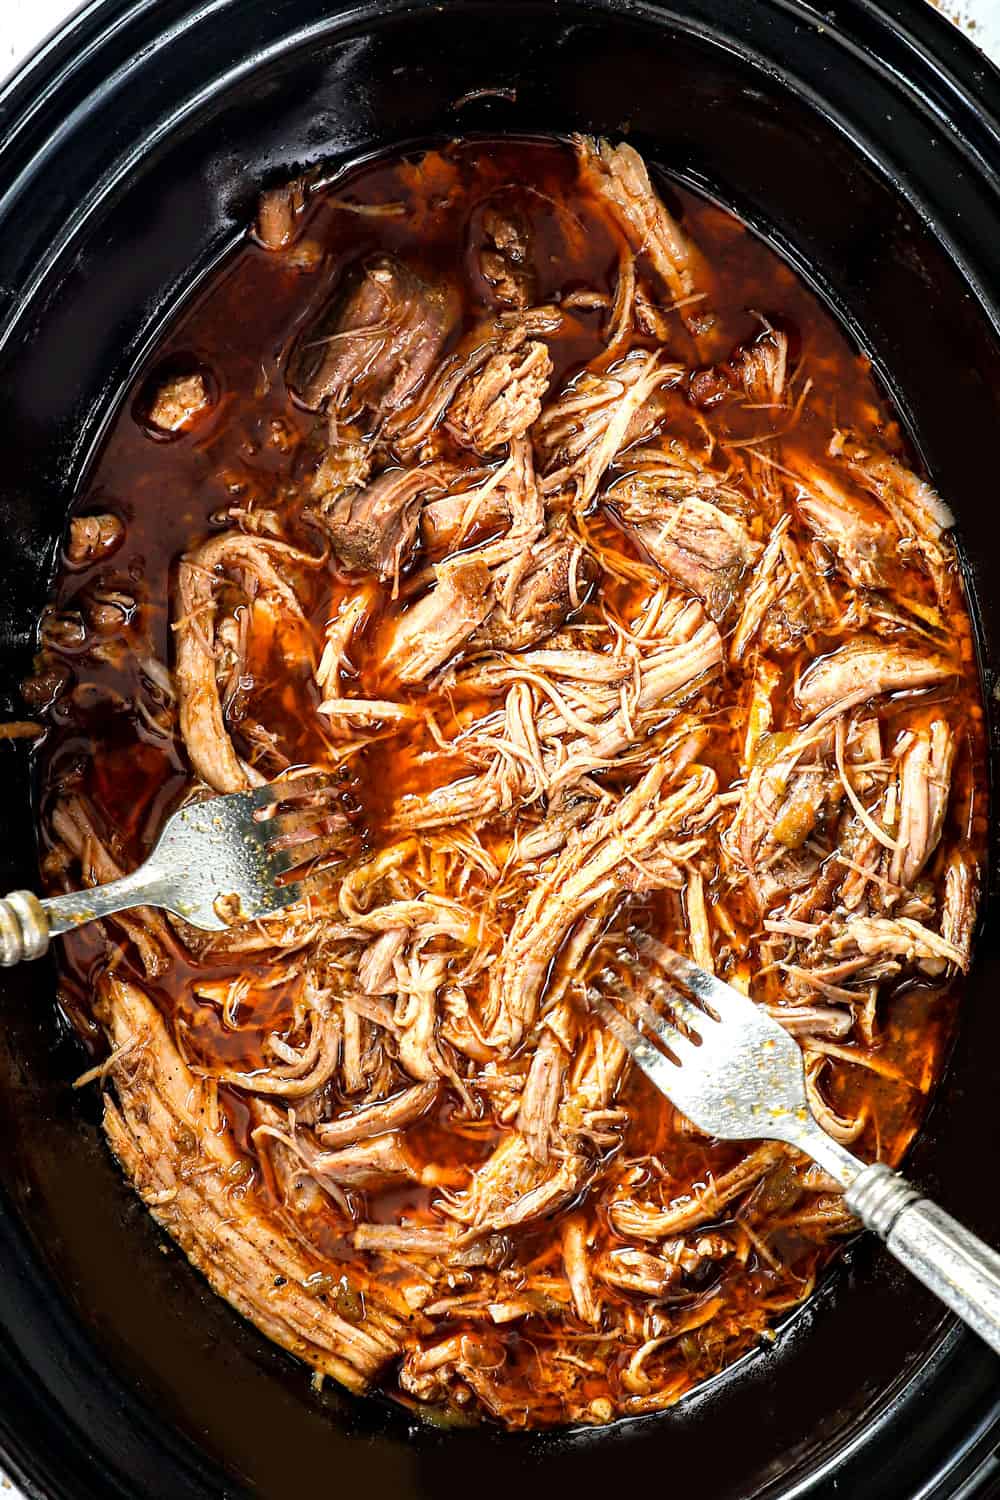 showing how to make Pulled Pork Sandwich recipe by shredding the pork and allowing it to braise in the juices